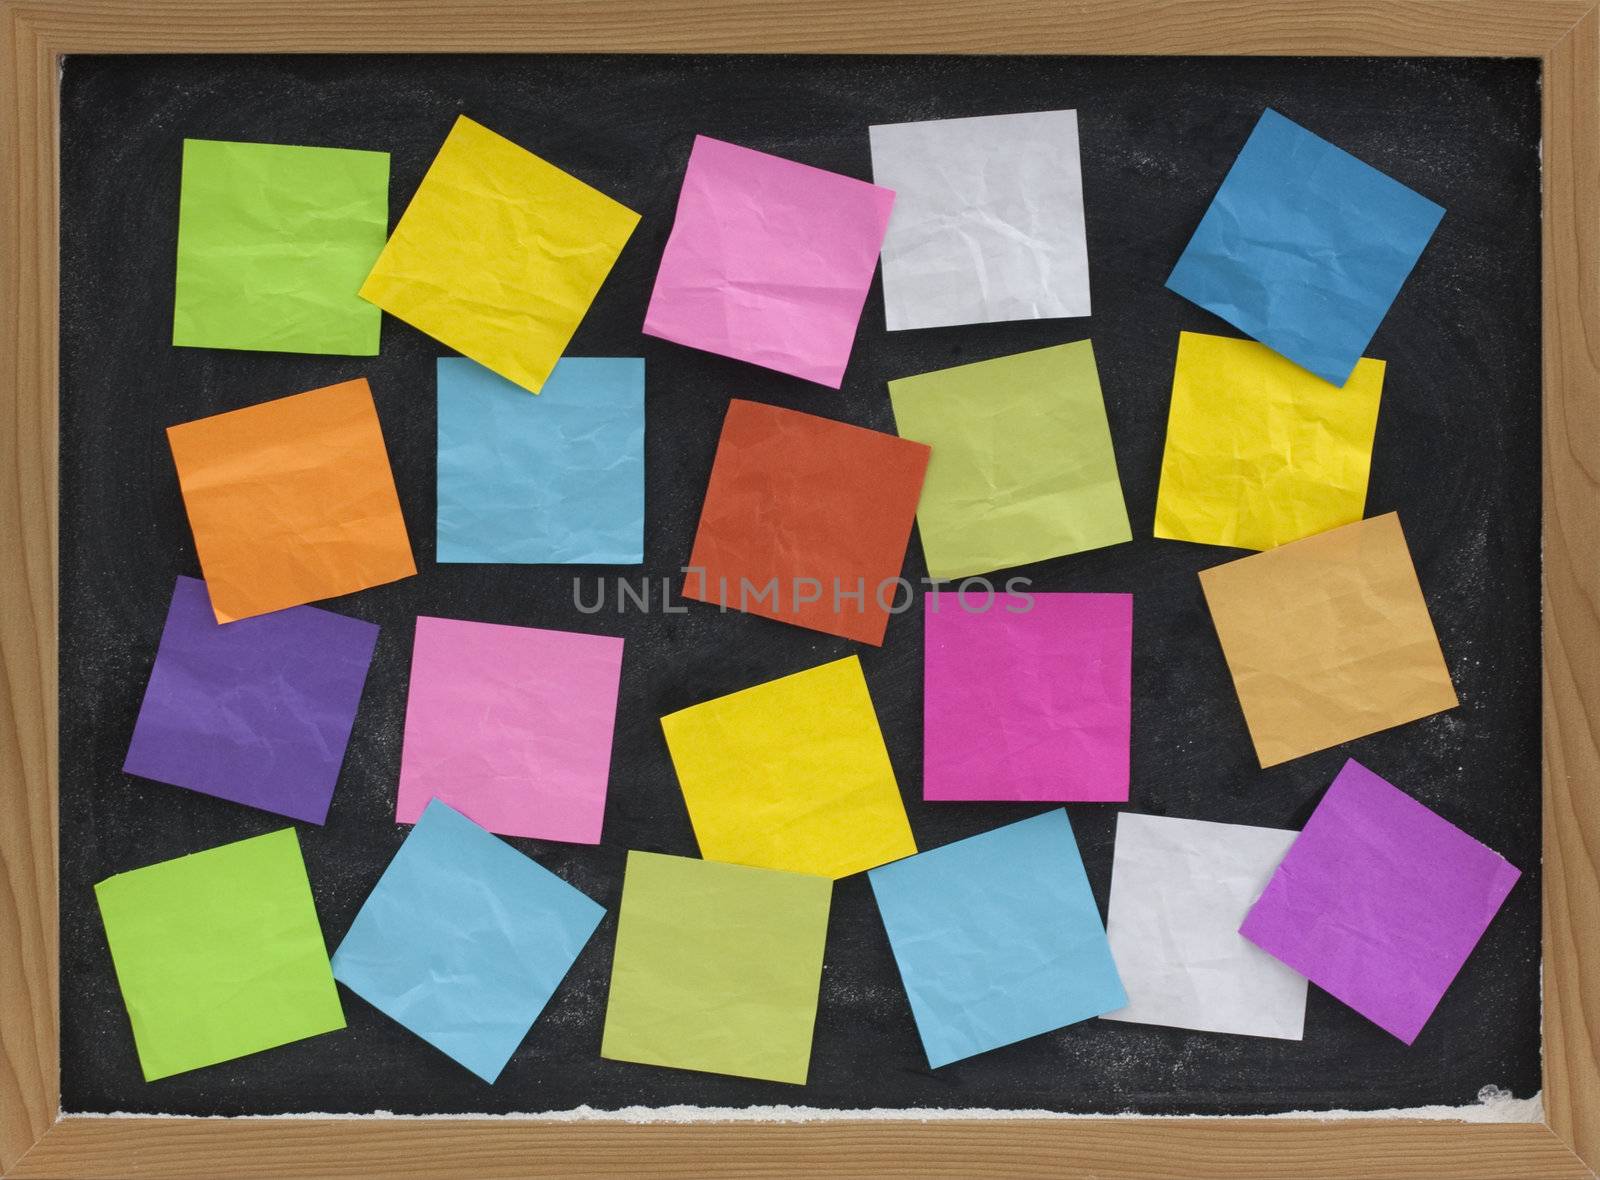 blackboard covered with colorful blank sticky notes